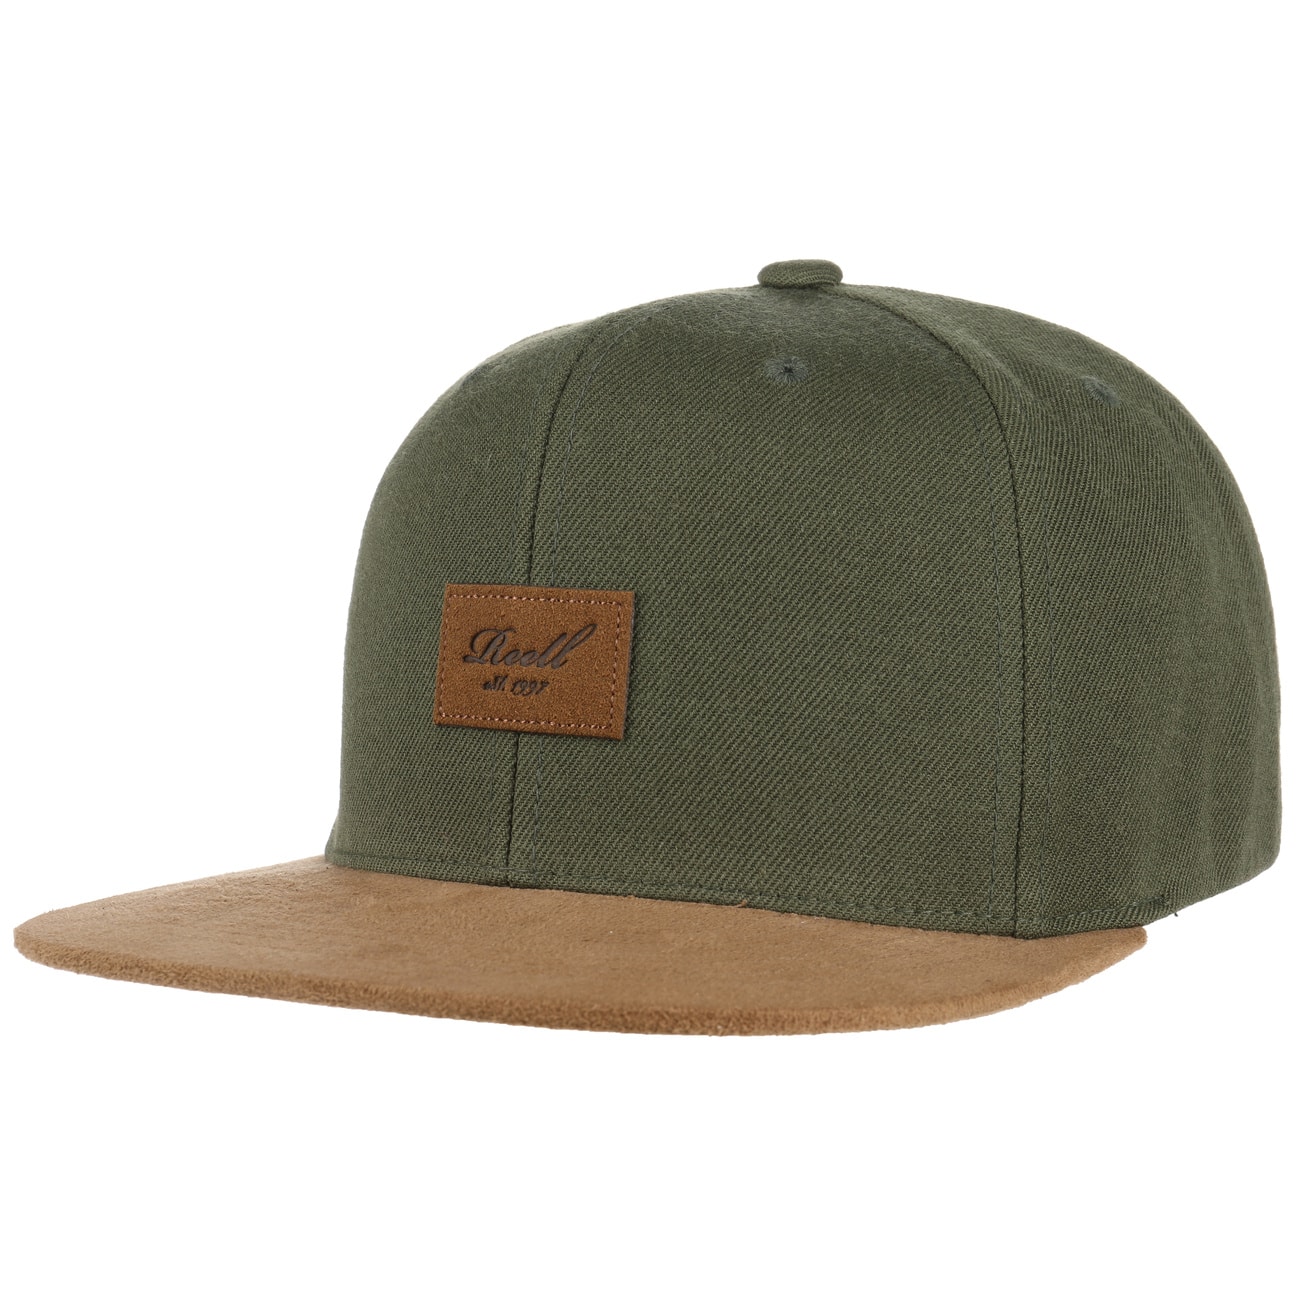 Suede 6 Panel Classic Snapback Cap by Reell von Reell